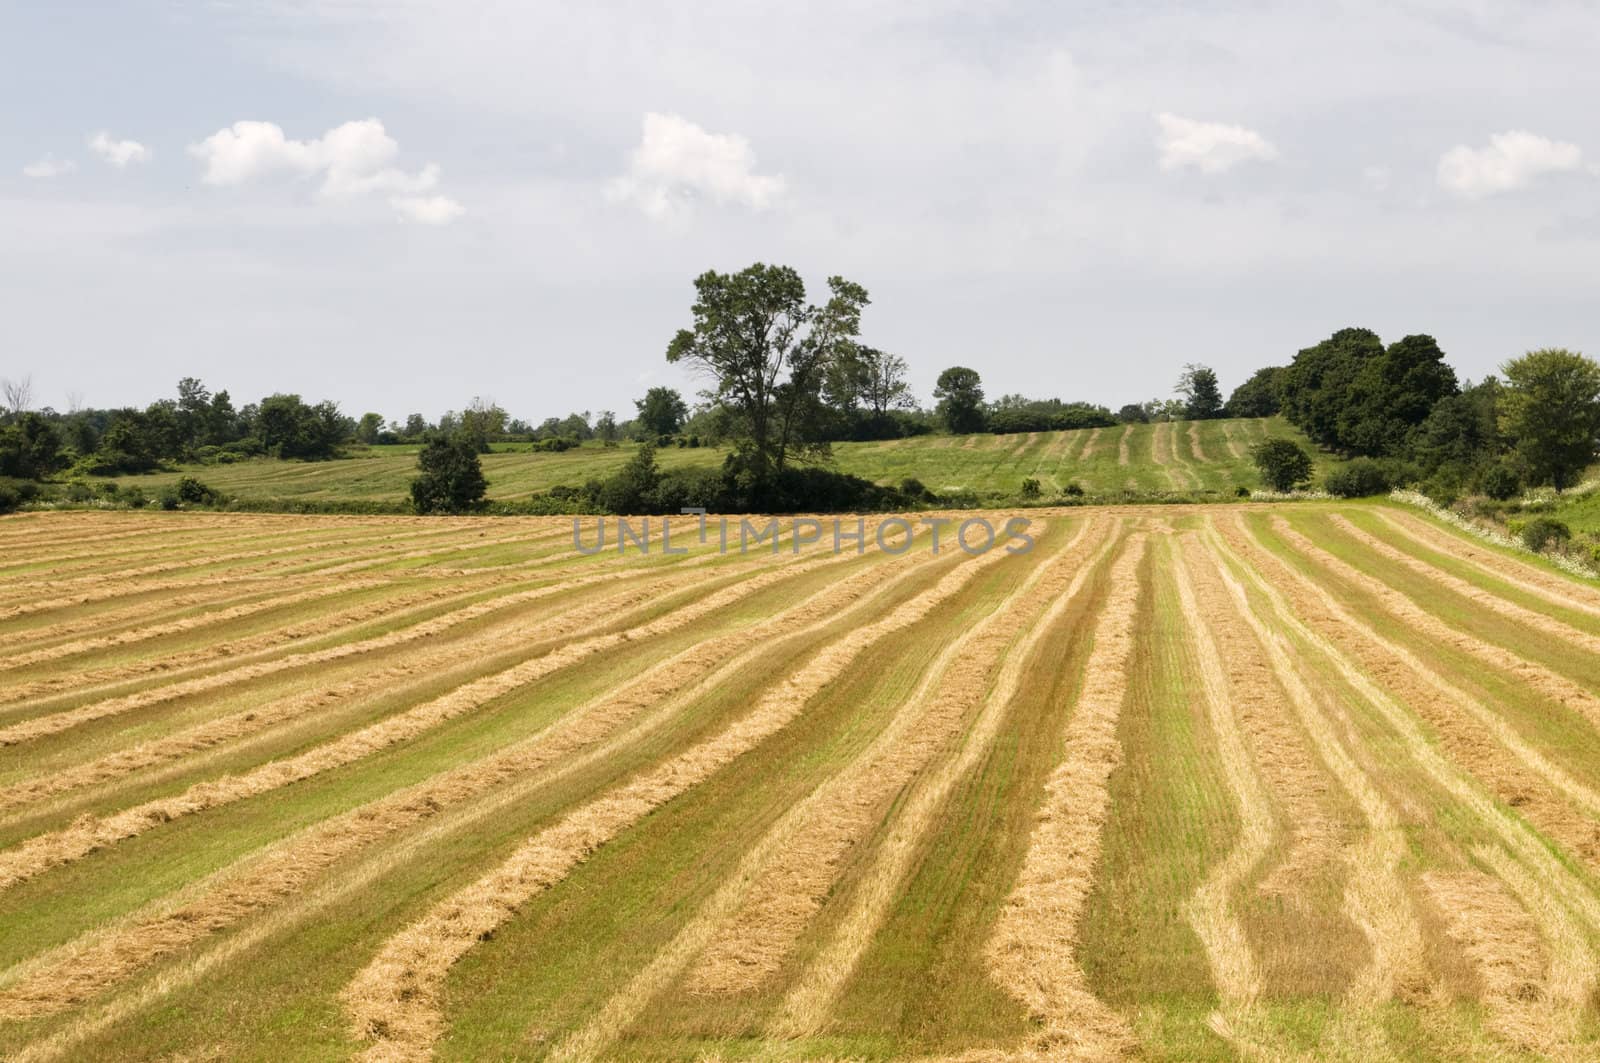 Horizontal image of rows of harvested crops